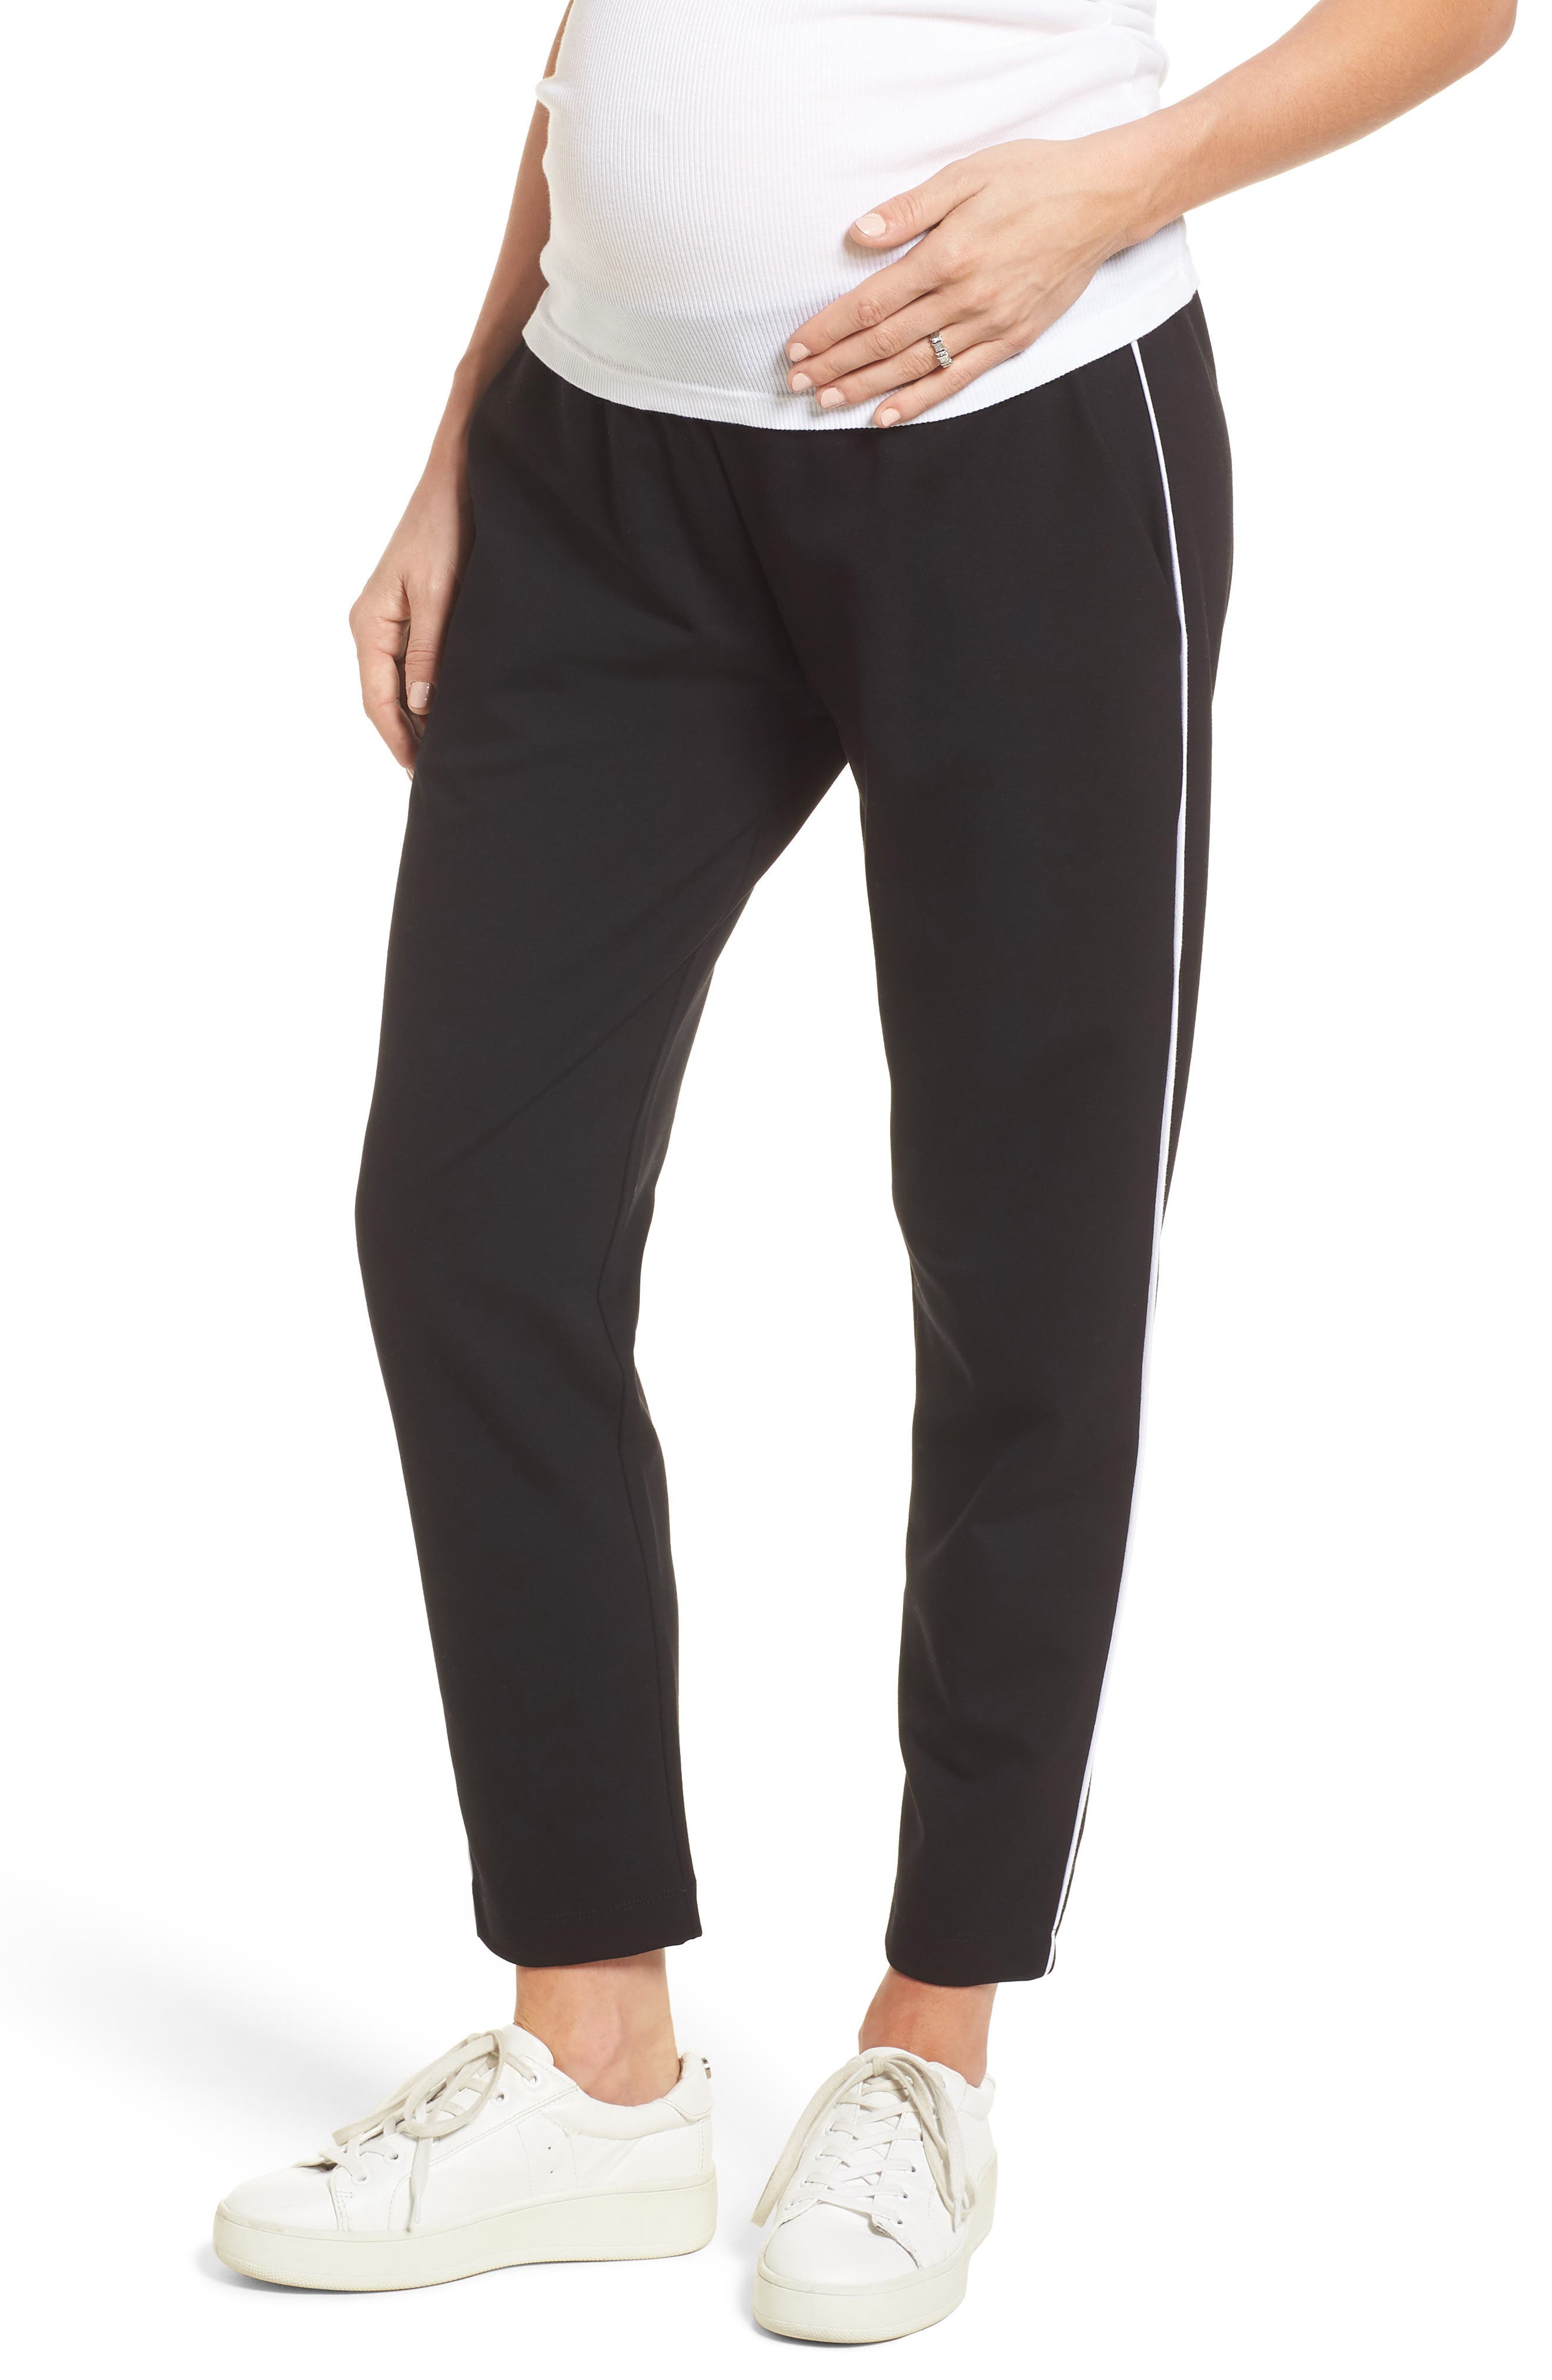 Isabella Oliver Maxine Contrast Maternity Pants in Caviar Black